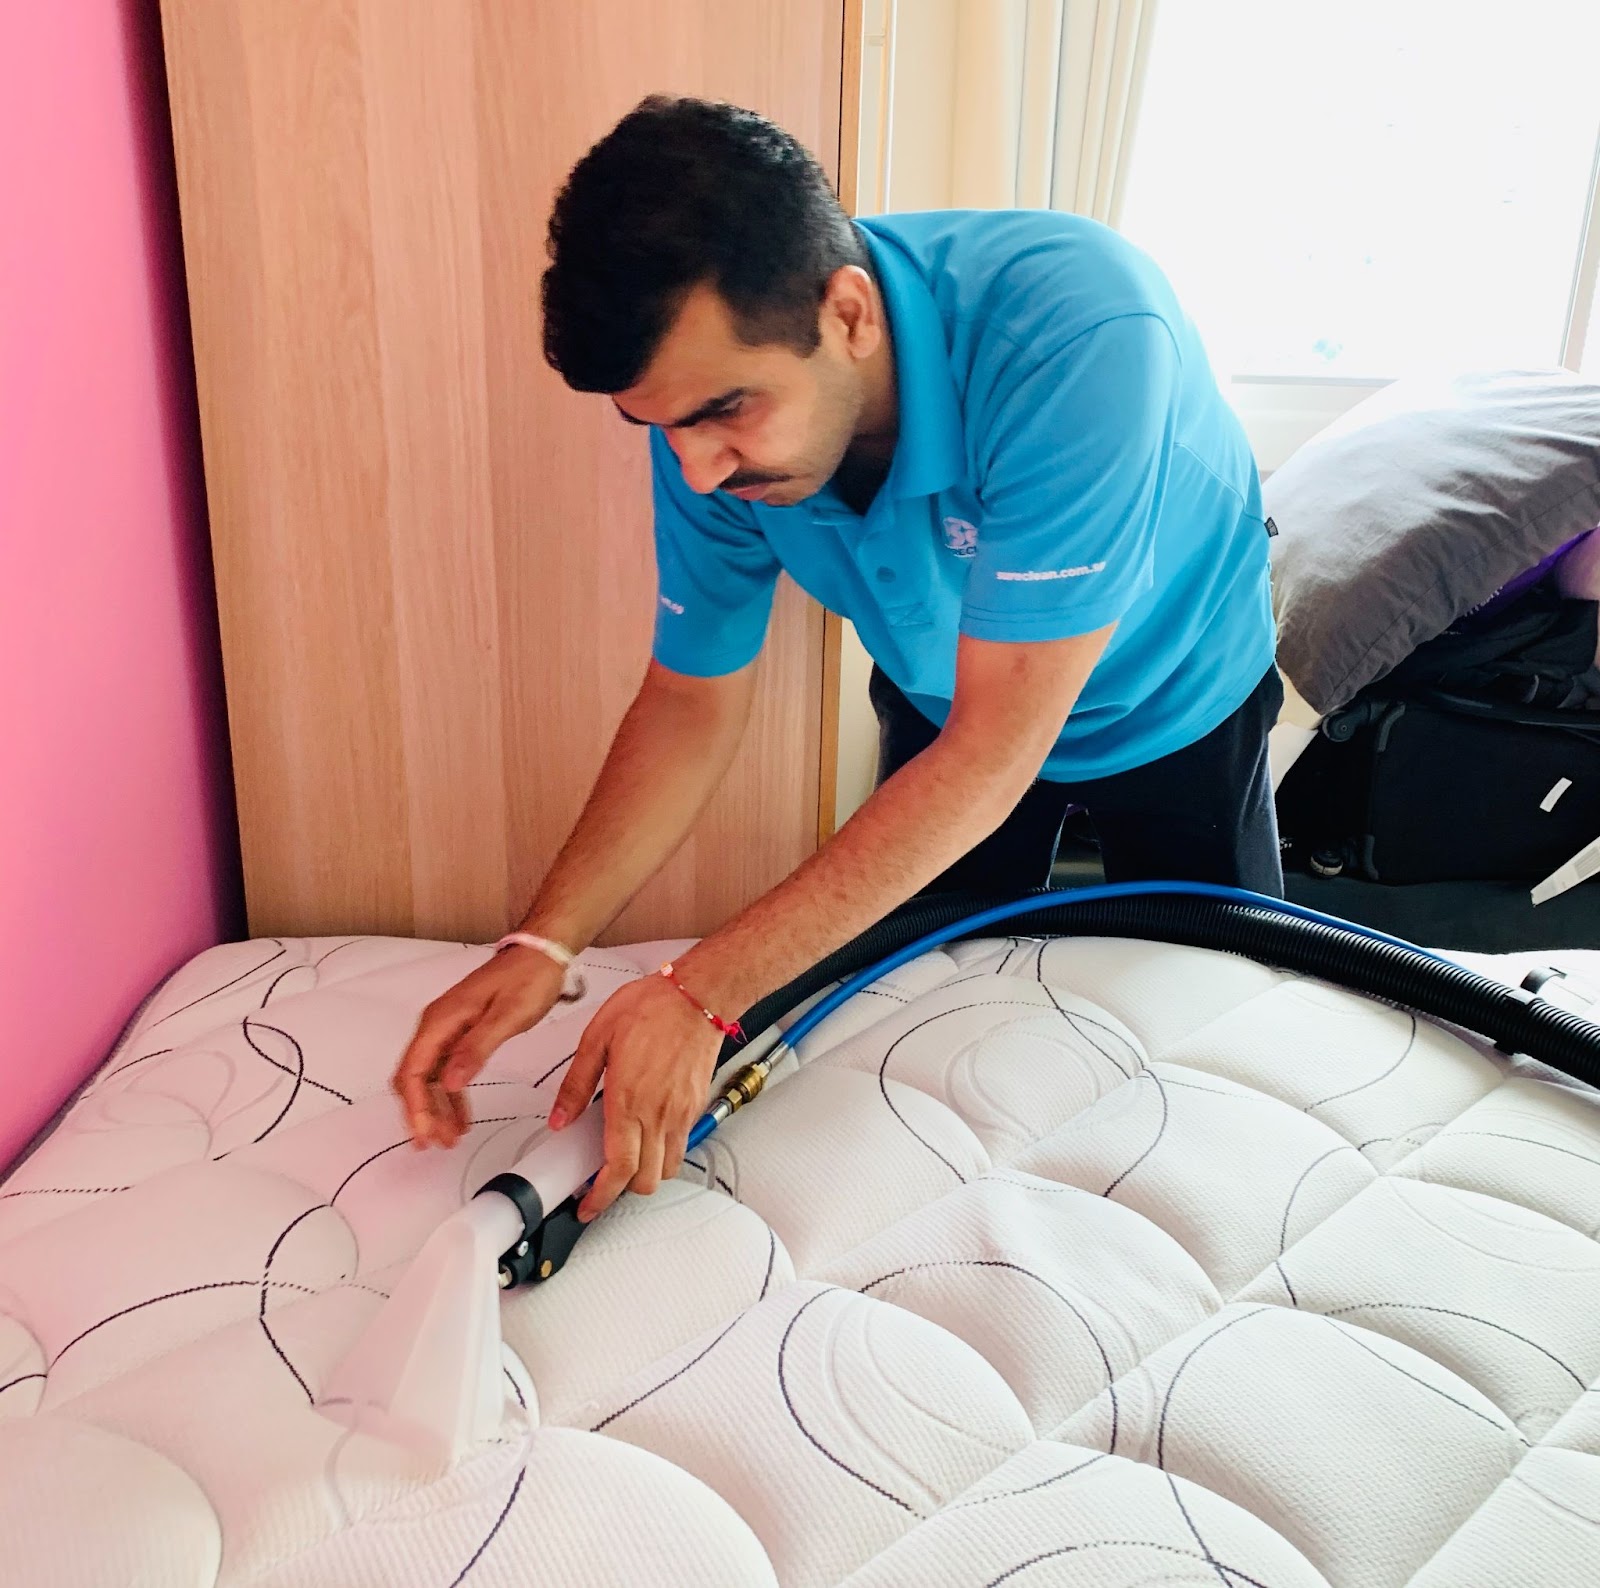 mattress cleaning service in sentosa with sureclean